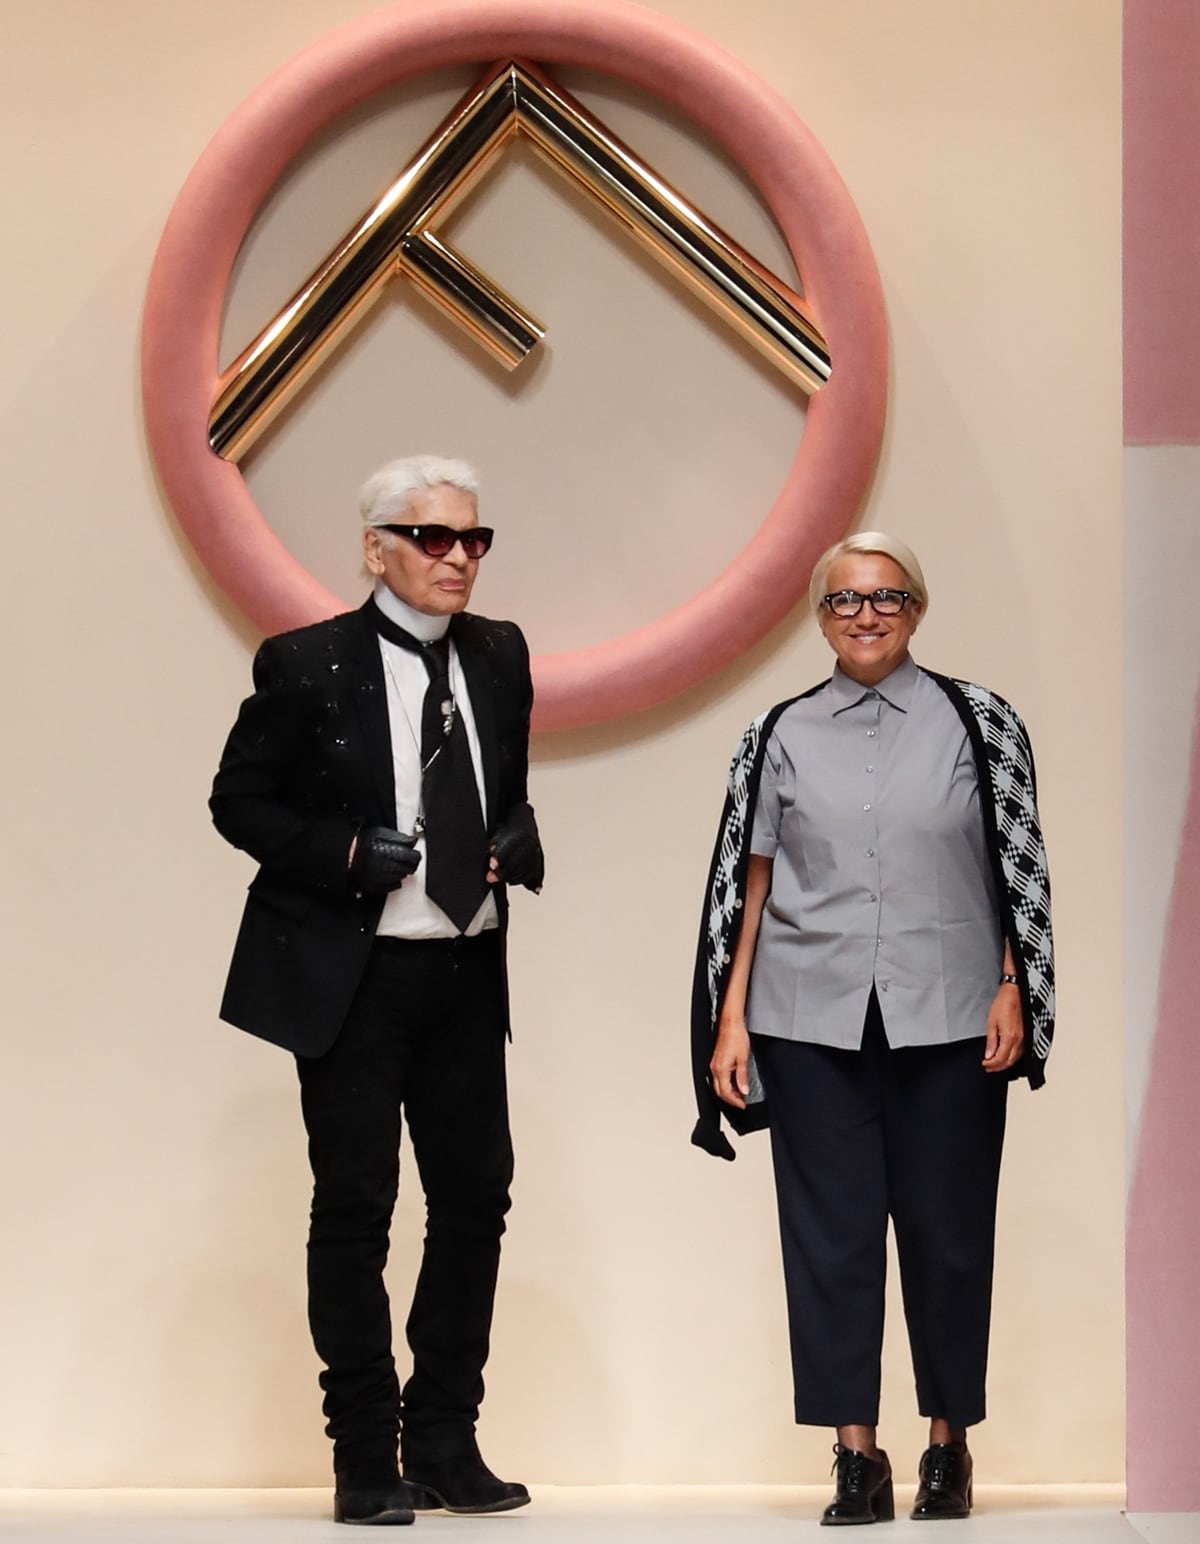 Silvia Venturini Fendi (R), who introduced the Fendi Baguette bag in 1997, with her friend Karl Lagerfeld at the Fendi show